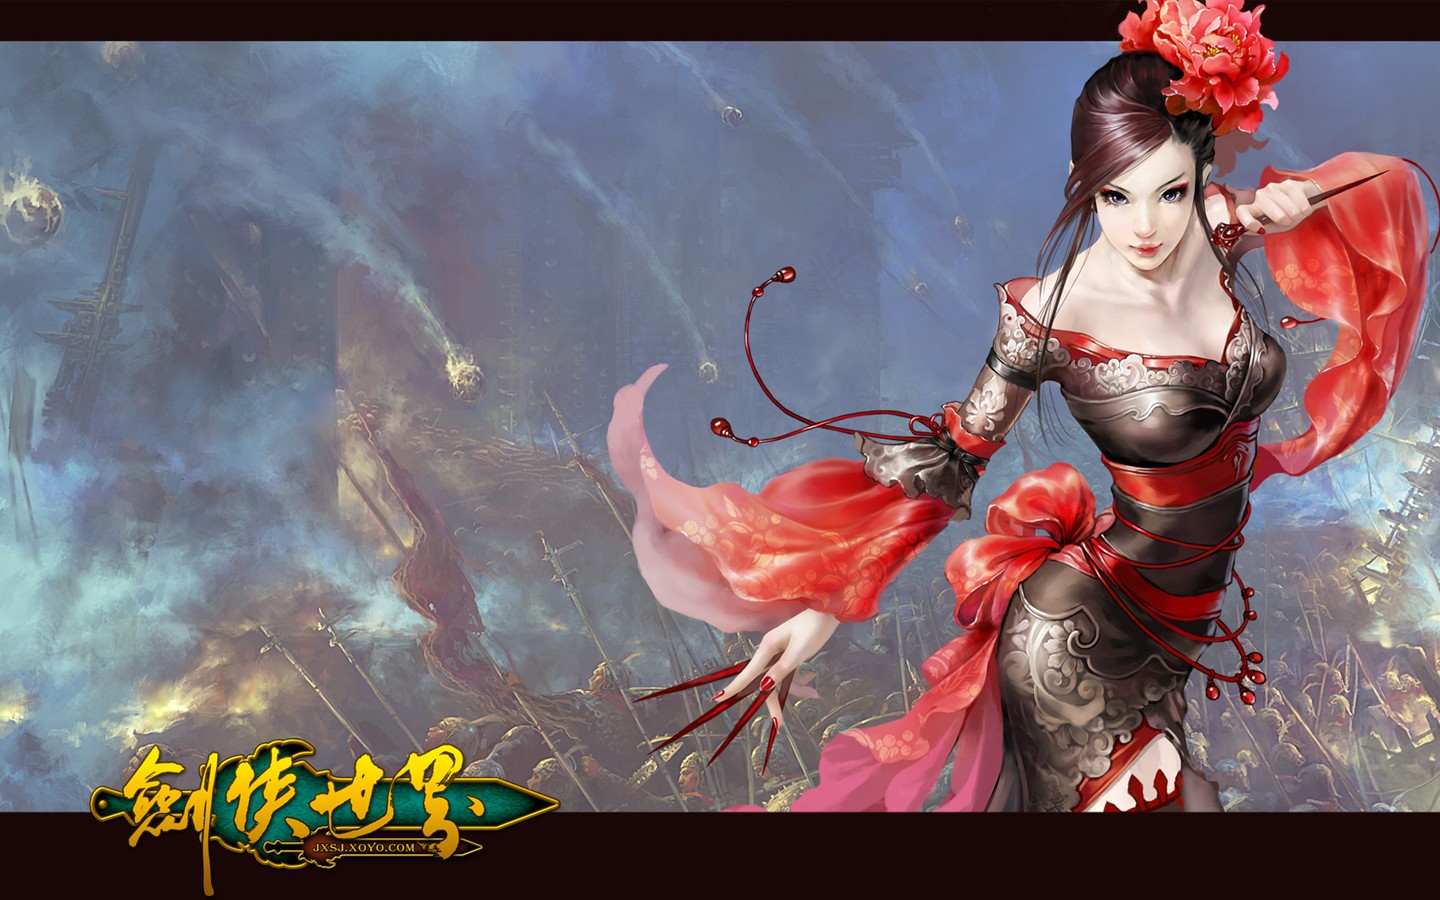 D of the swordsman in the world martial arts online game wallpaper ...